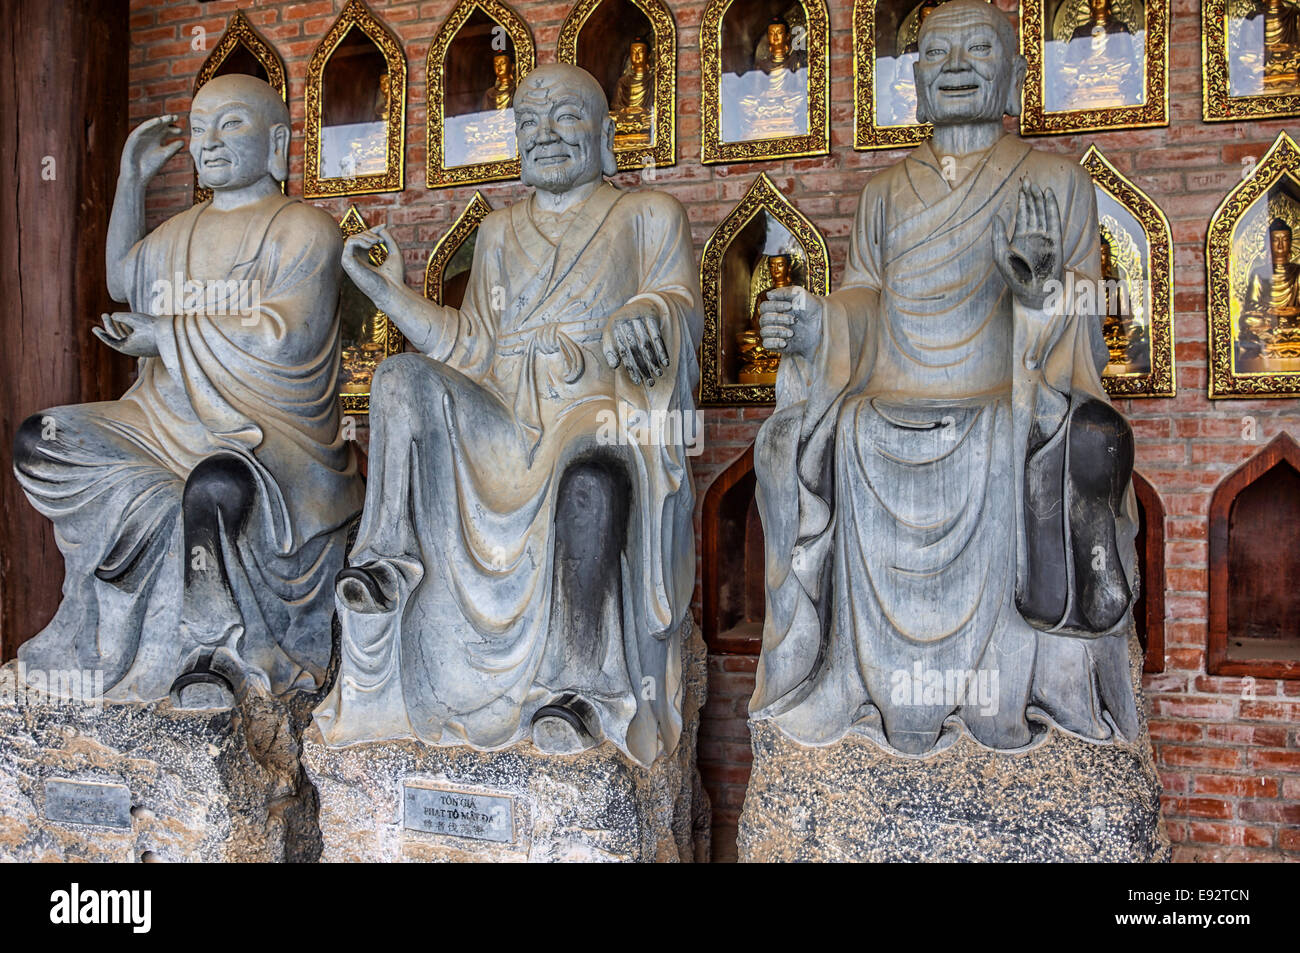 Different facial expressions and postures on Buddhist statues. Stock Photo